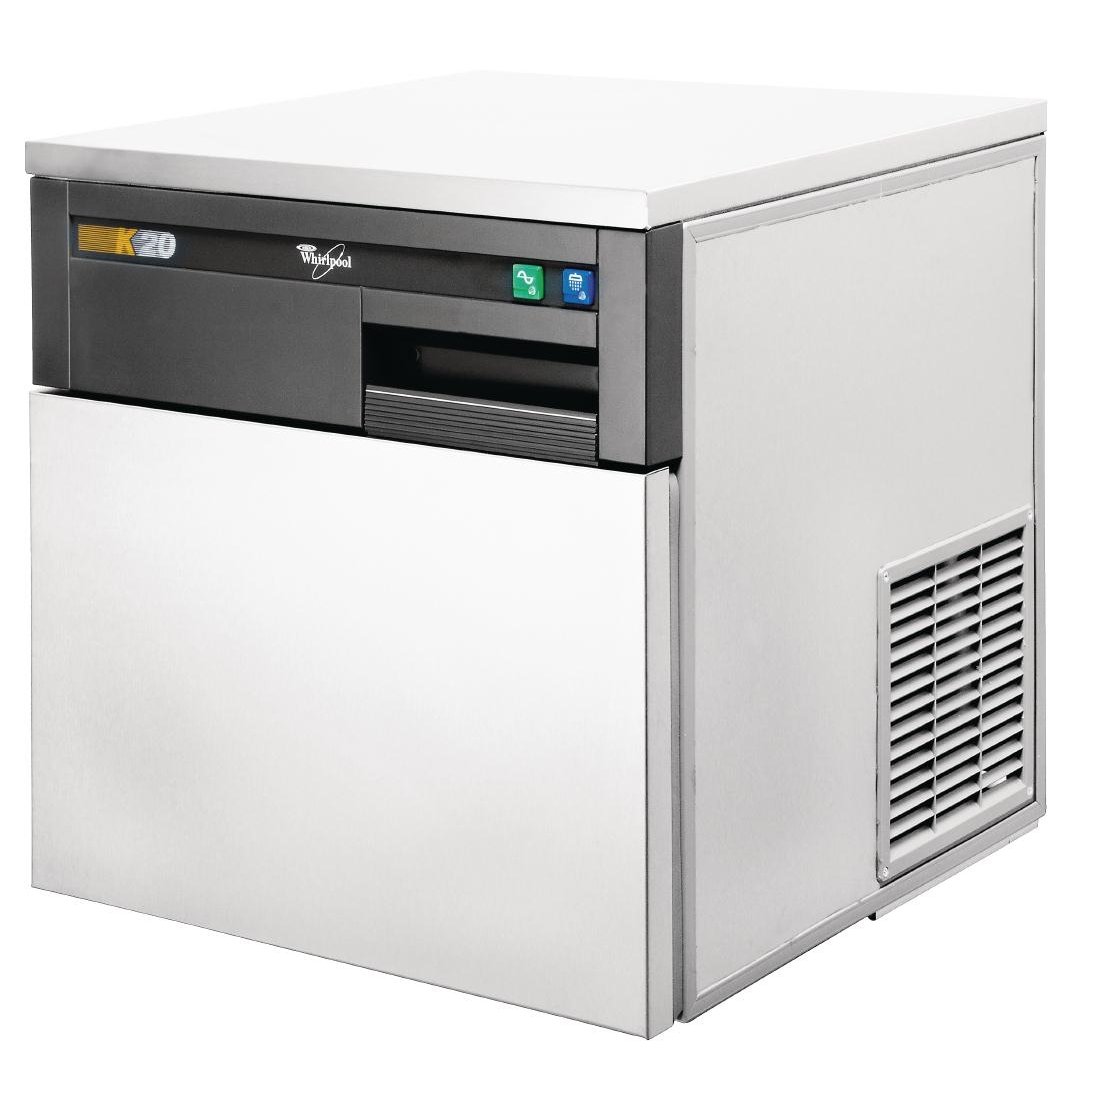 Whirlpool Air-Cooled Compact Ice Maker AGB022 K20